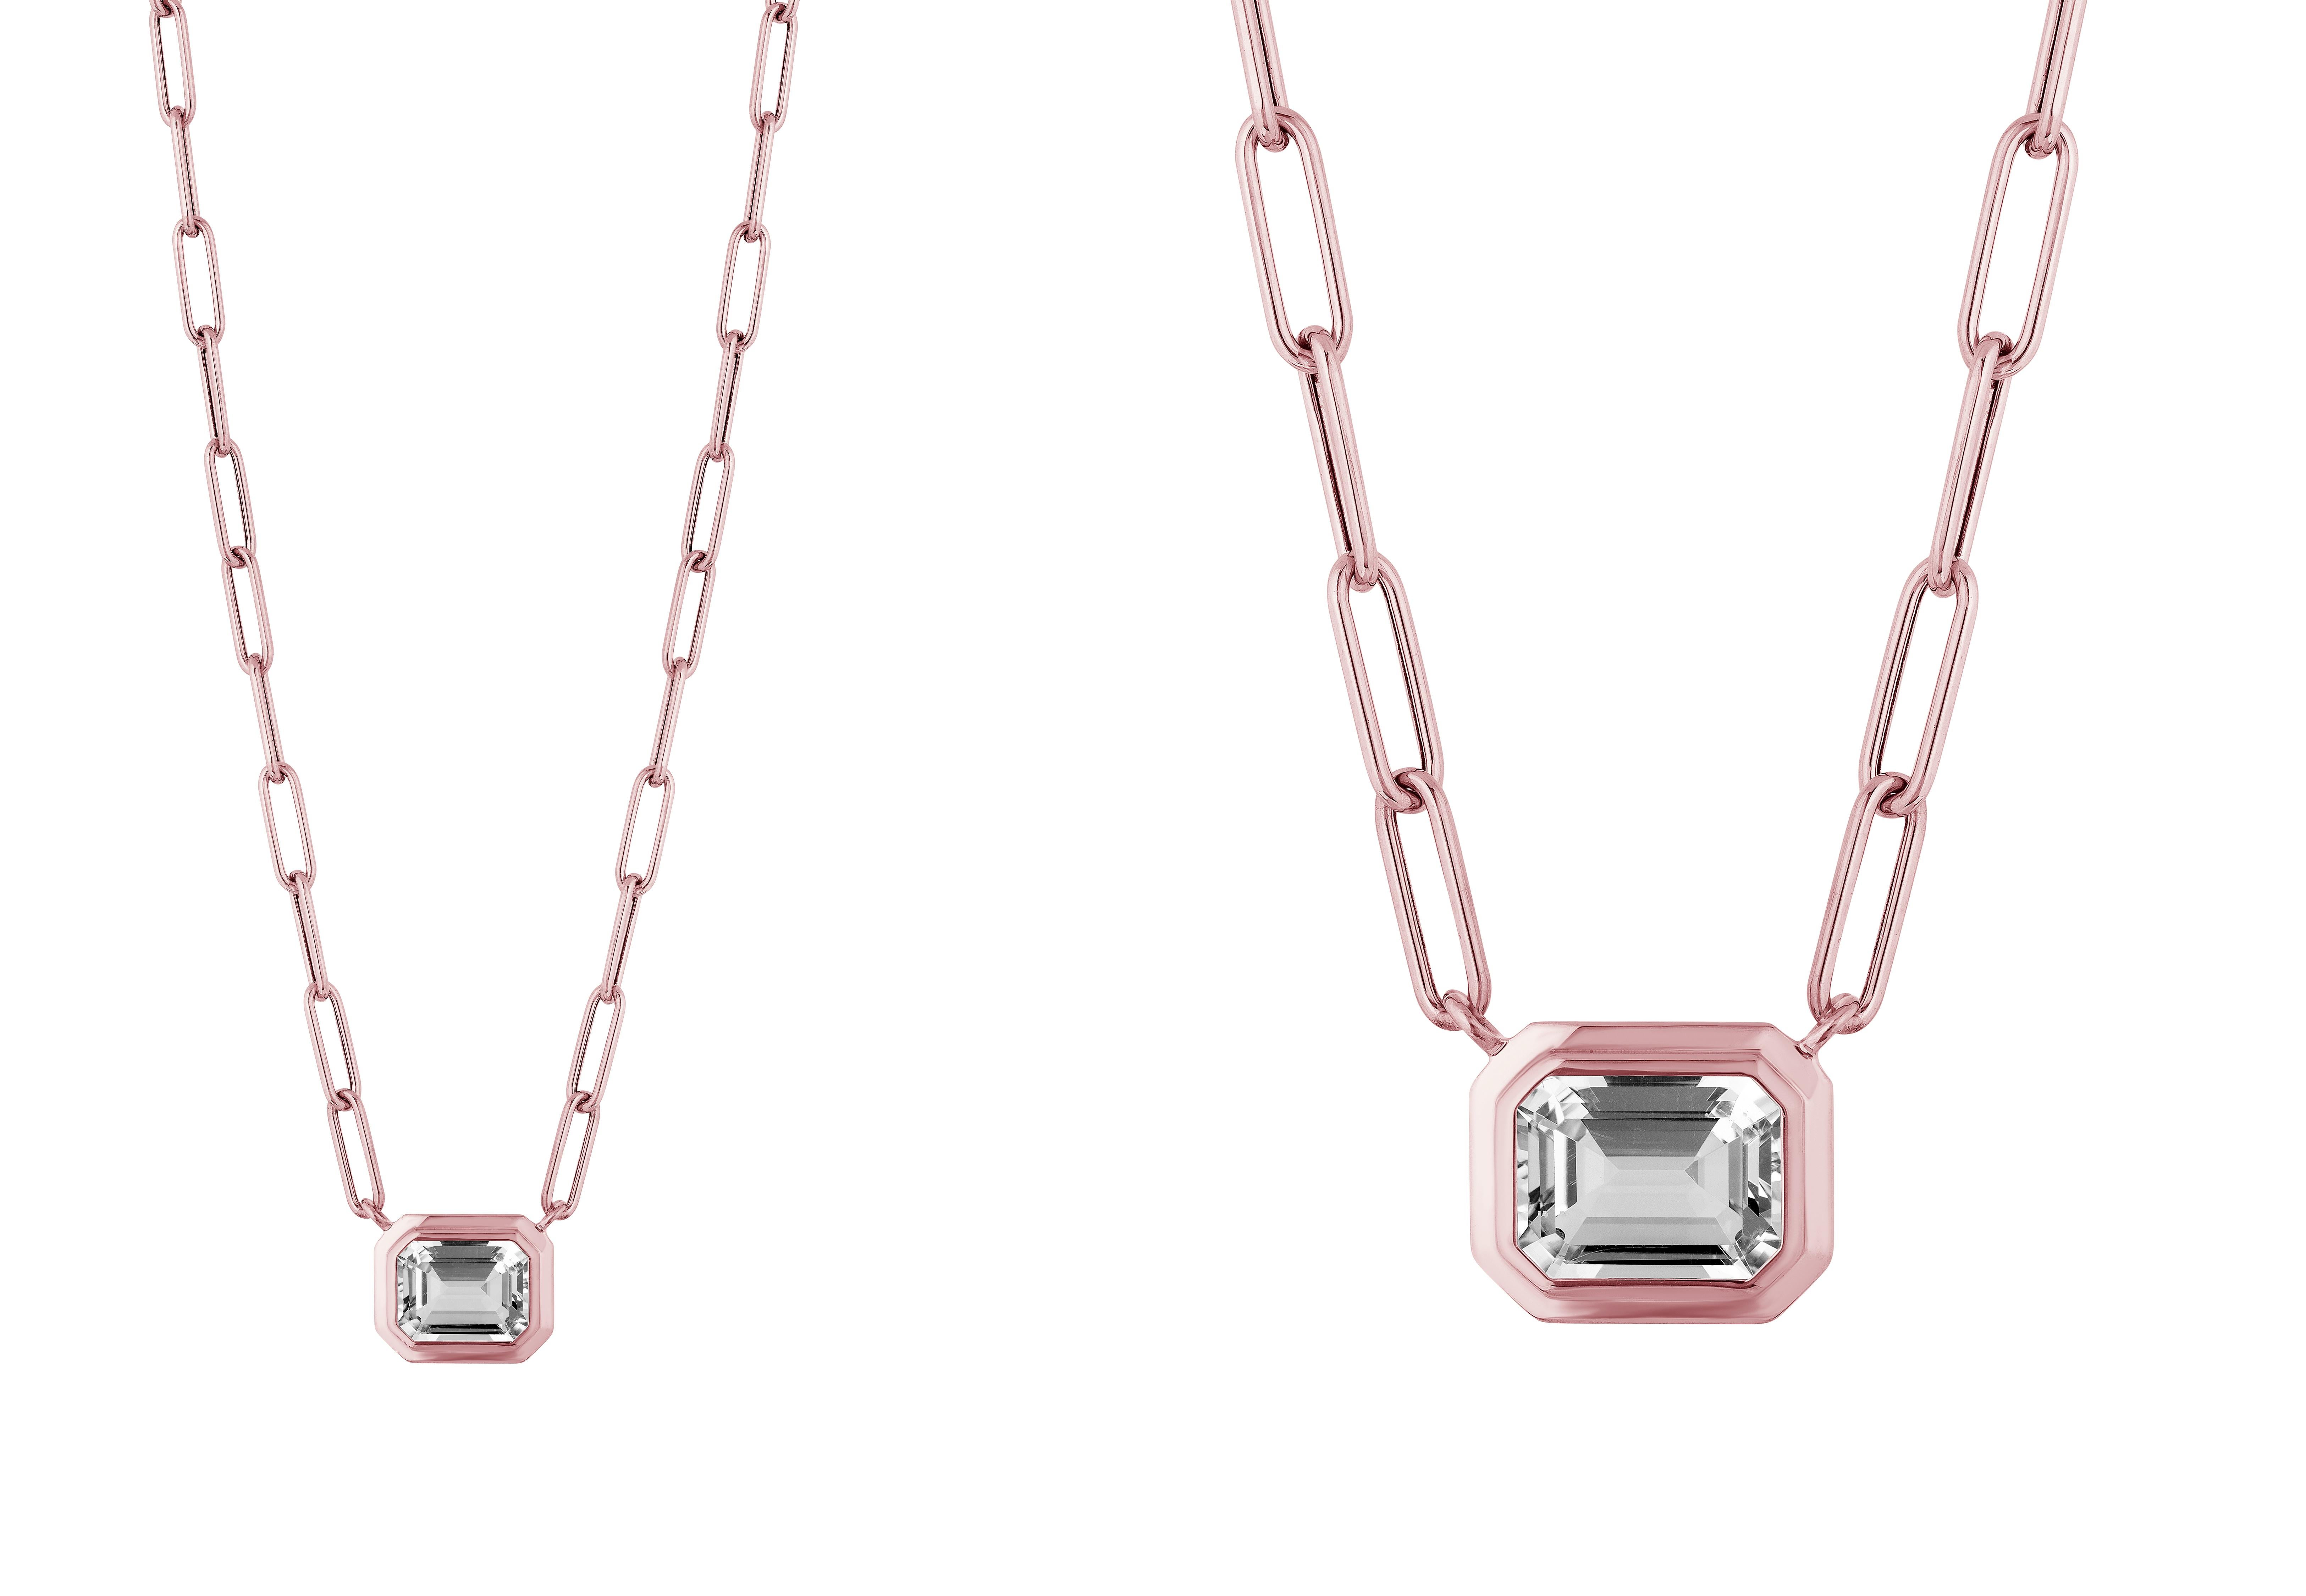 This beautiful East-West Rock Crystal Emerald Cut Bezel Set Pendant in 18K Rose Gold is from our ‘Manhattan’ Collection. Minimalist lines yet bold structures are what our Manhattan Collection is all about. Our pieces represent the famous skyline and